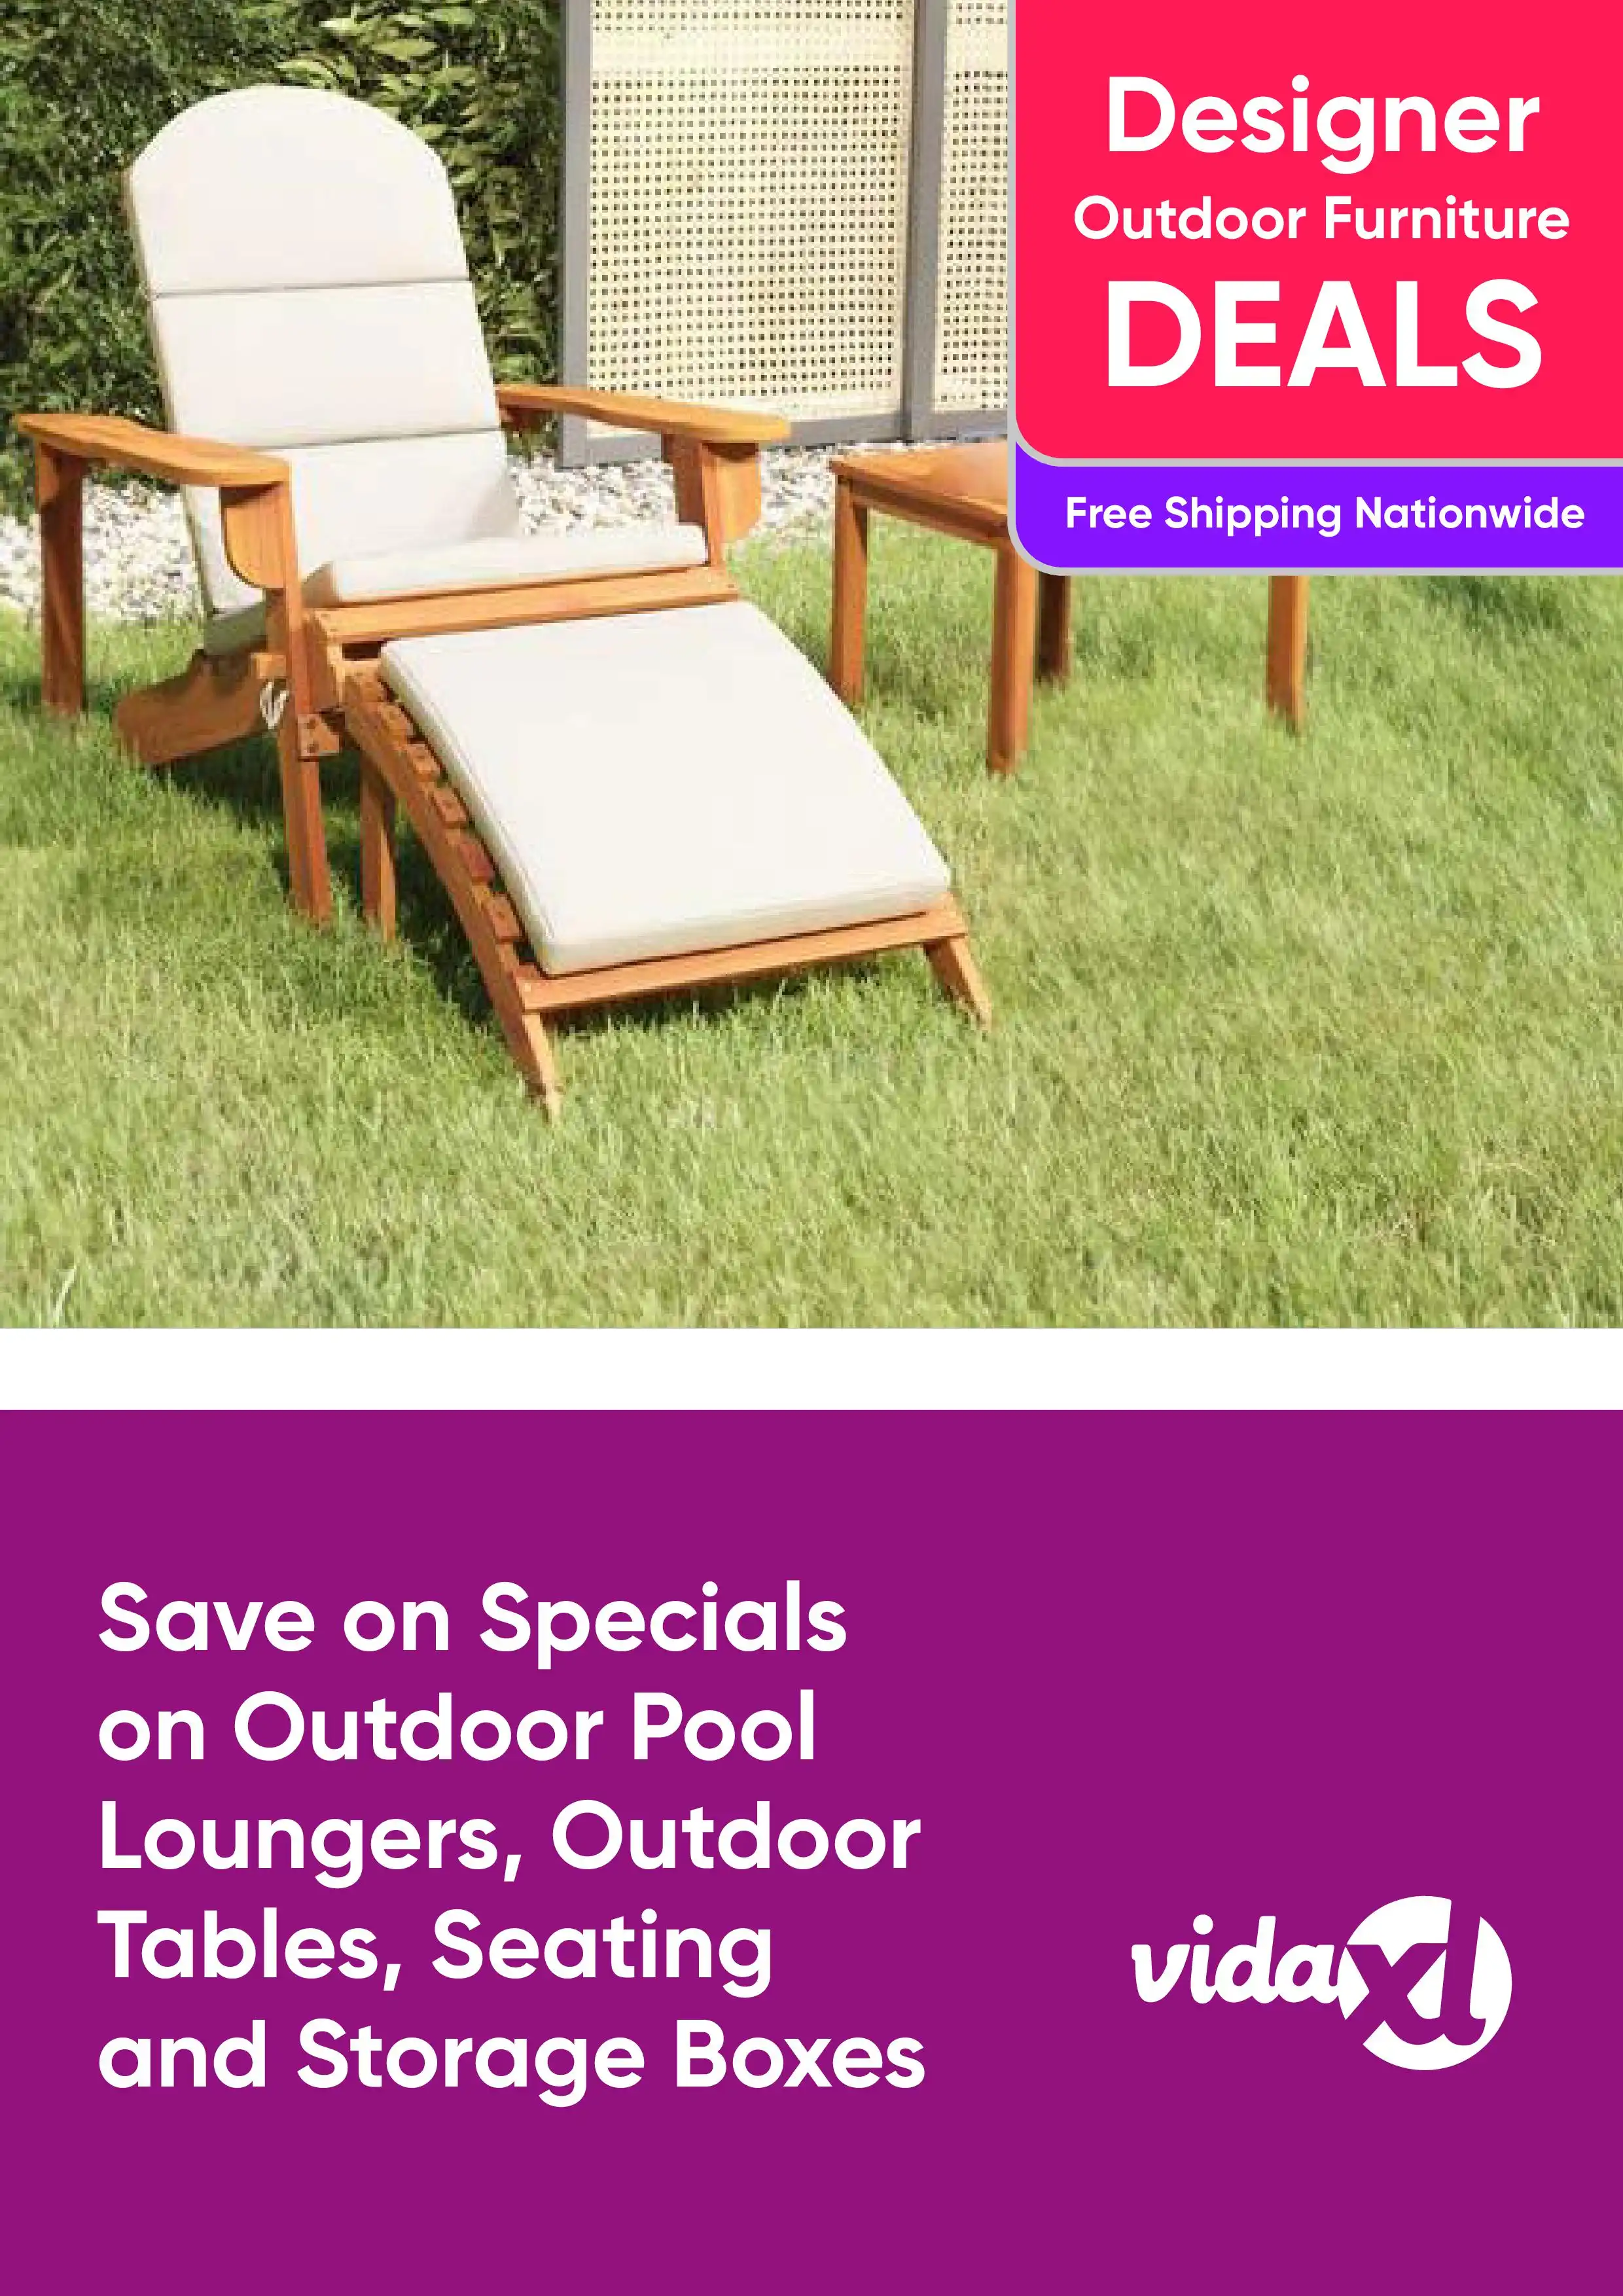 Save on Specials on Outdoor Pool Loungers, Outdoor Tables, Seating and Storage Boxes